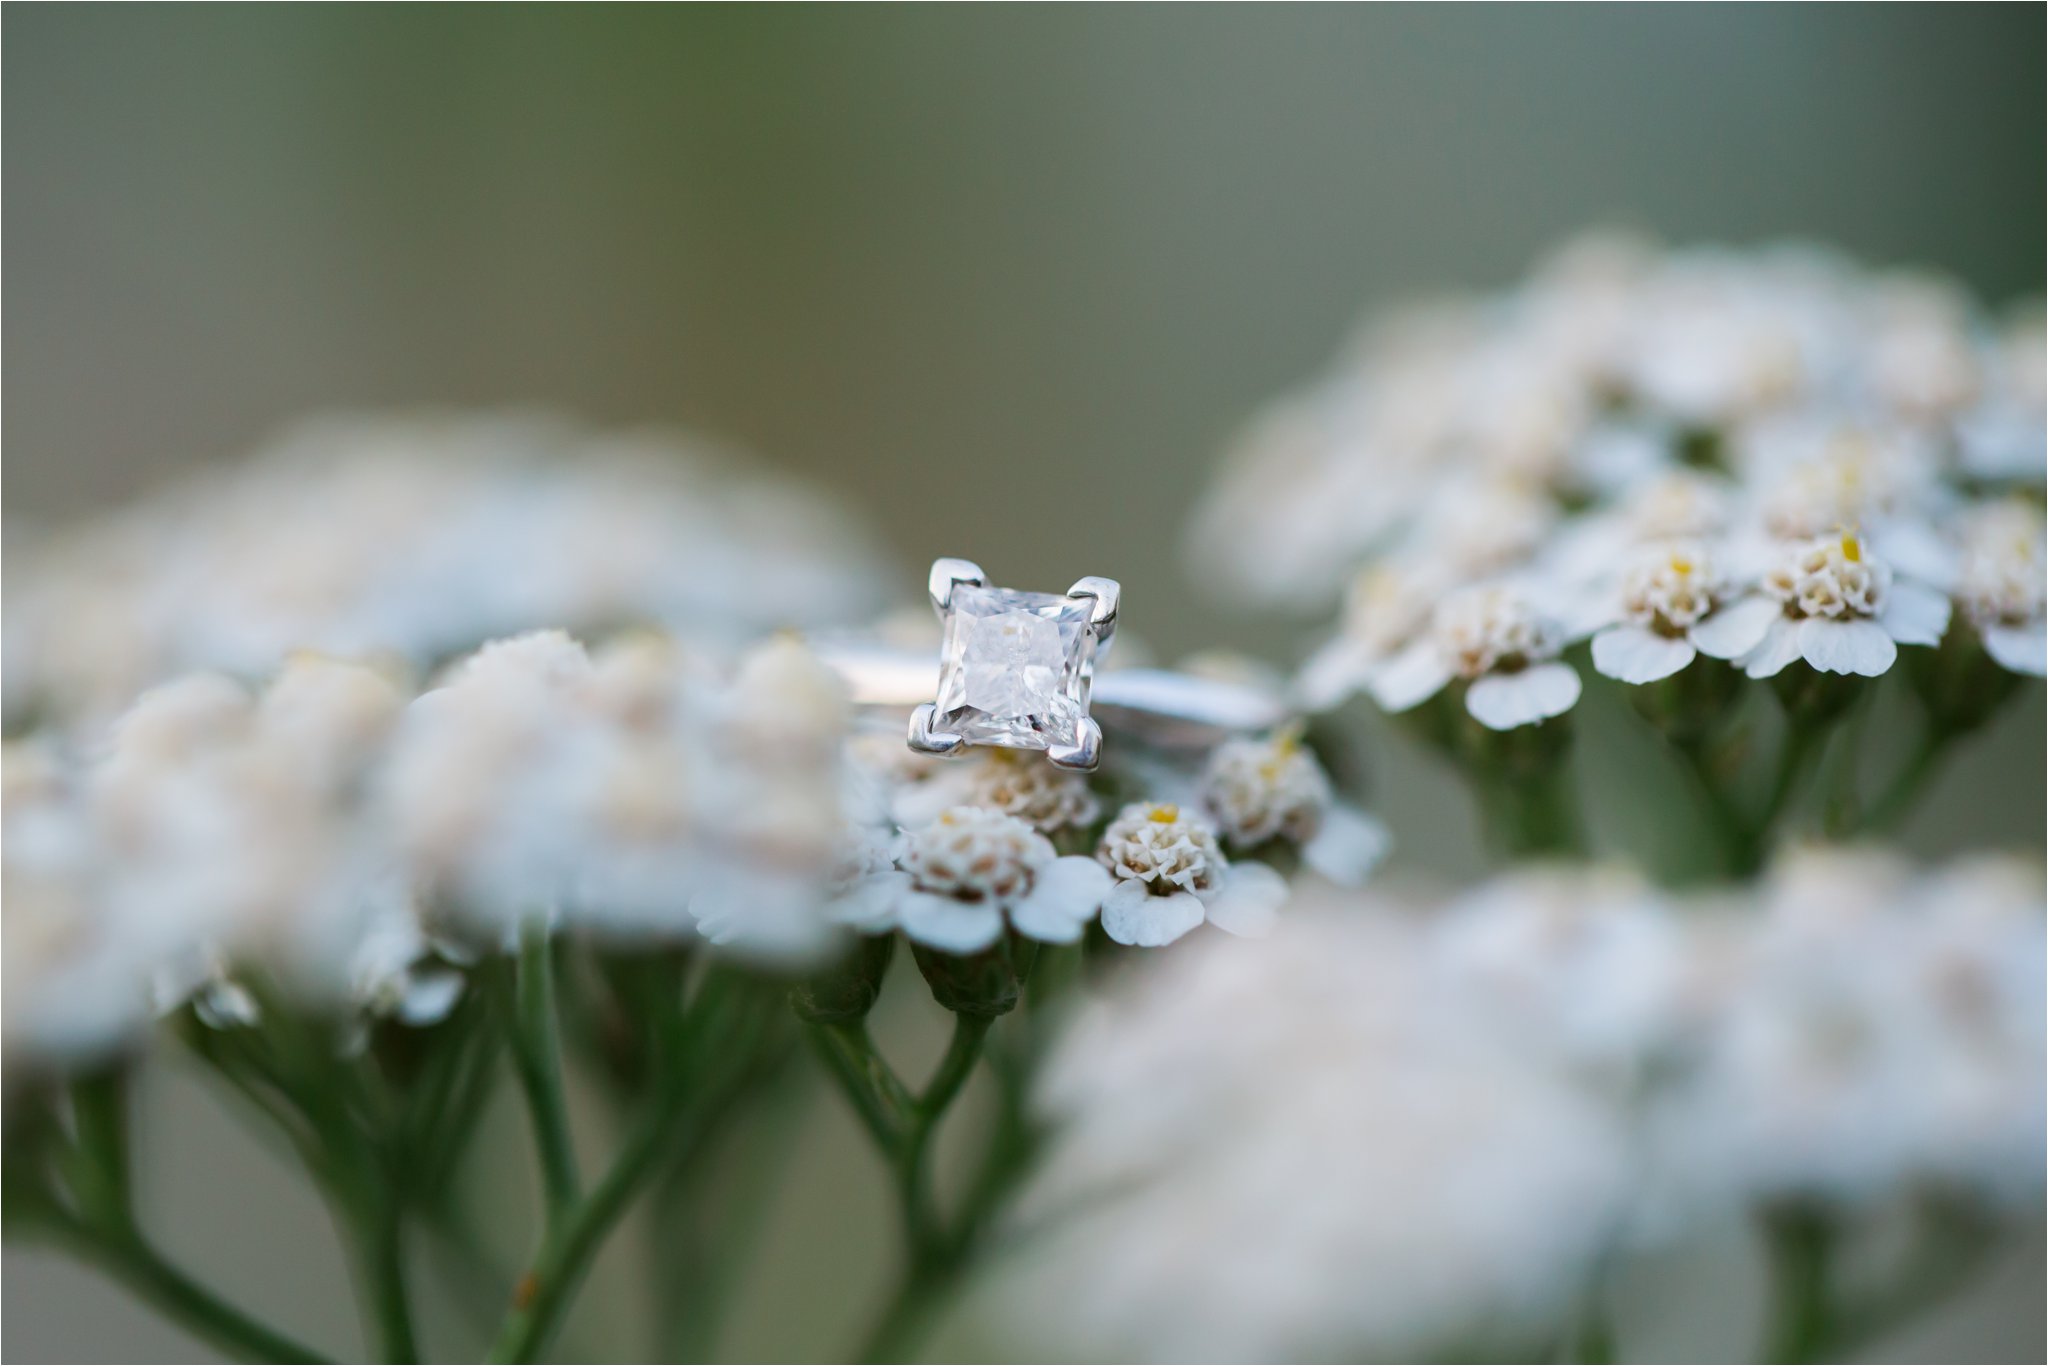 Engagement Ring on White Flowers (C) Maundy Mitchell